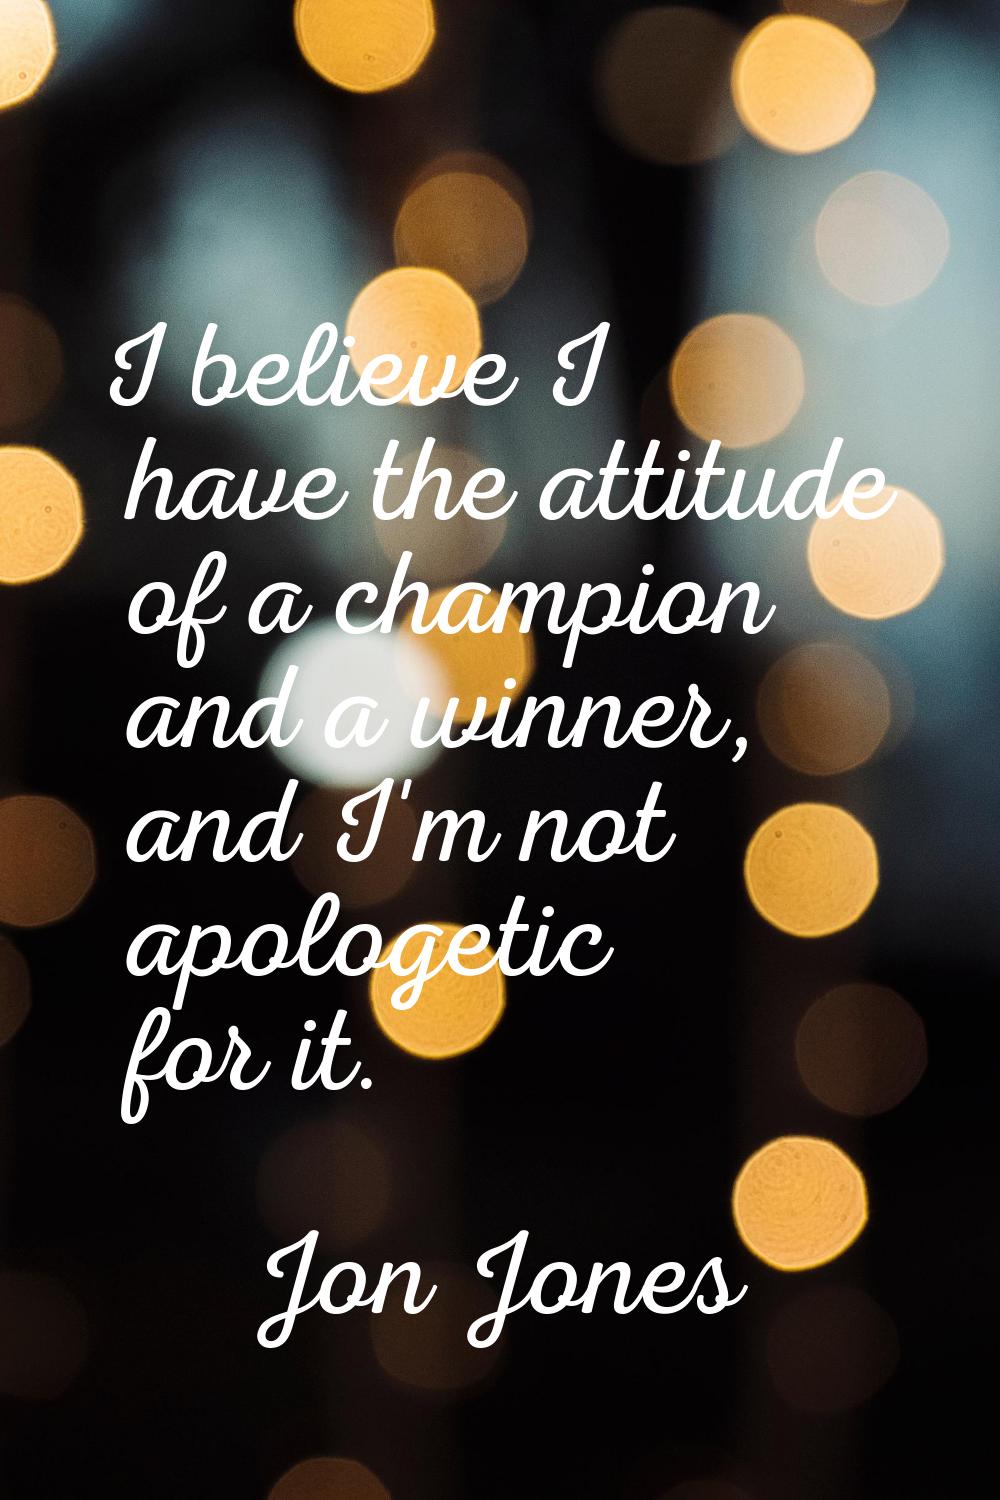 I believe I have the attitude of a champion and a winner, and I'm not apologetic for it.